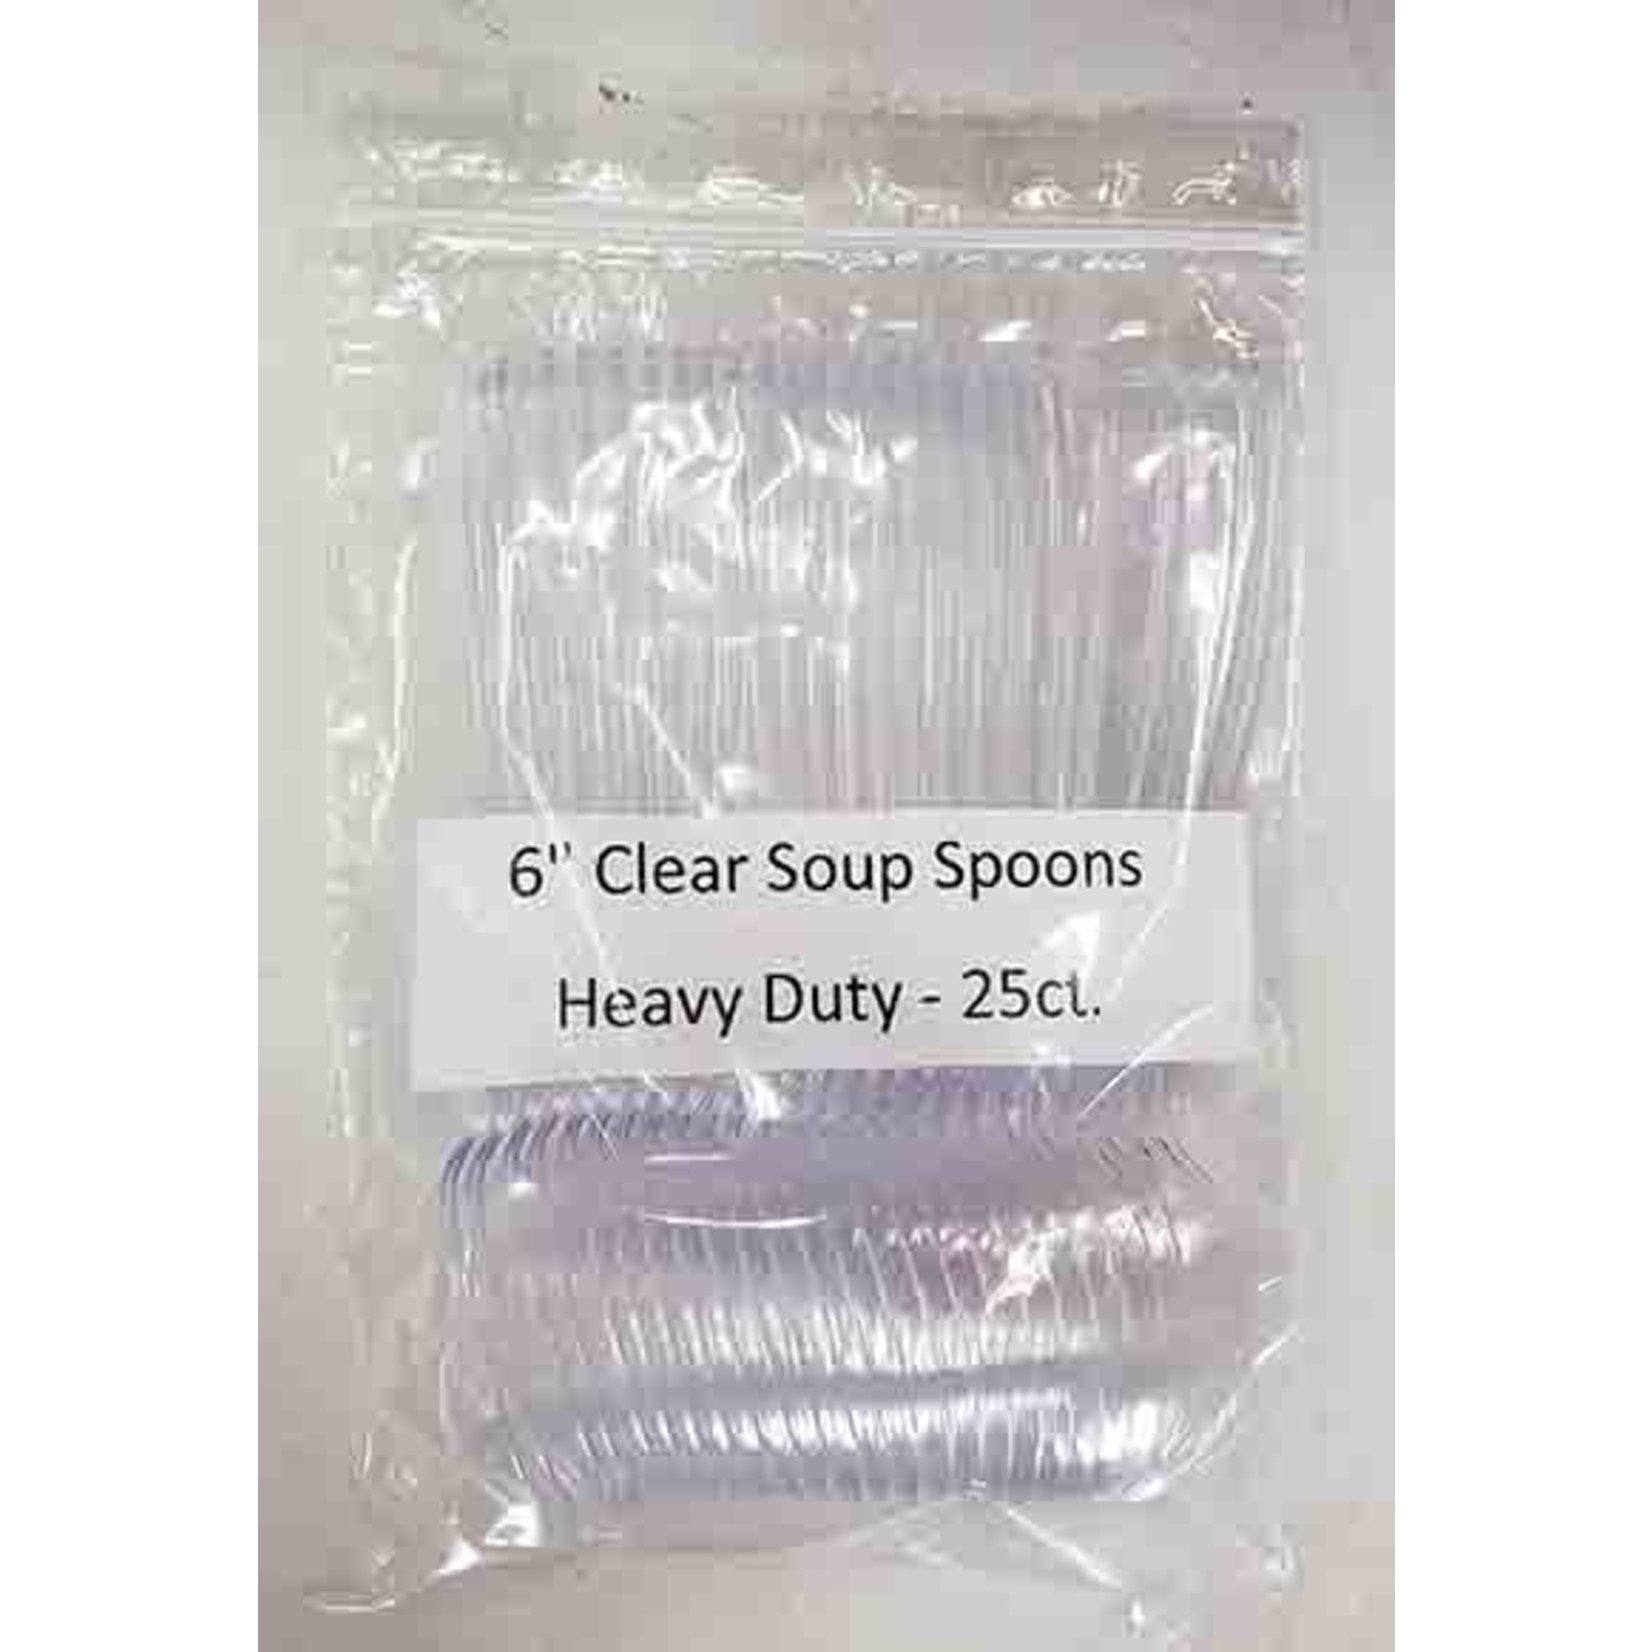 Visions Cutlery 6" Clear Heavy Duty Soup Spoons - 25ct.